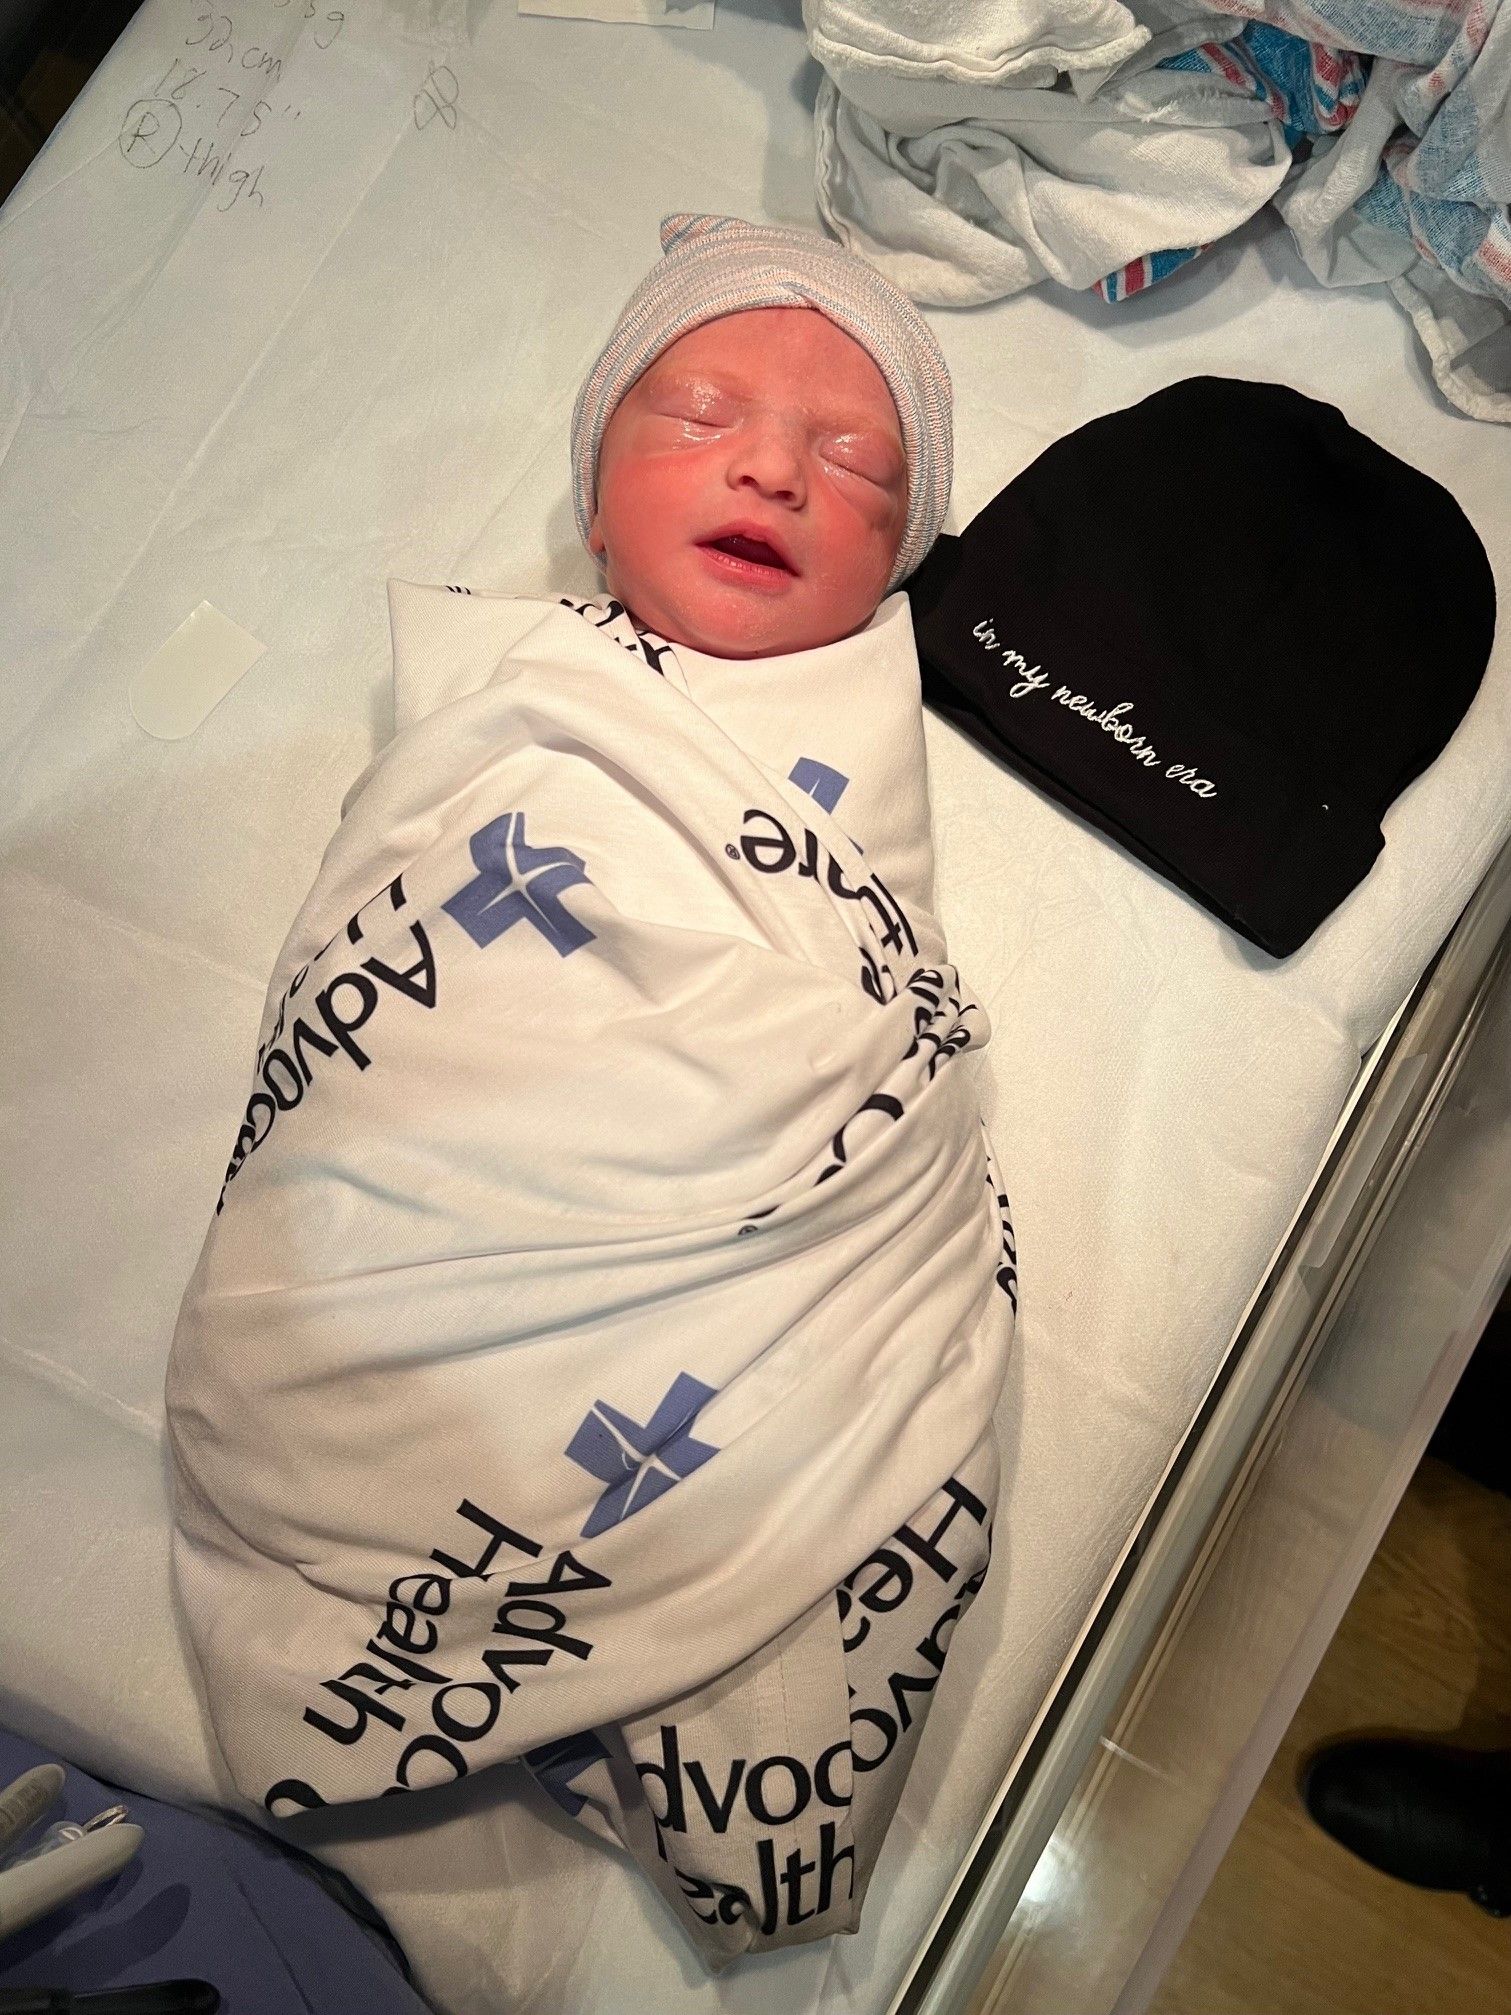 A photo showing a newborn baby wrapped in a swaddle with their eyes closed next to a beanie that says "in my newborn era."